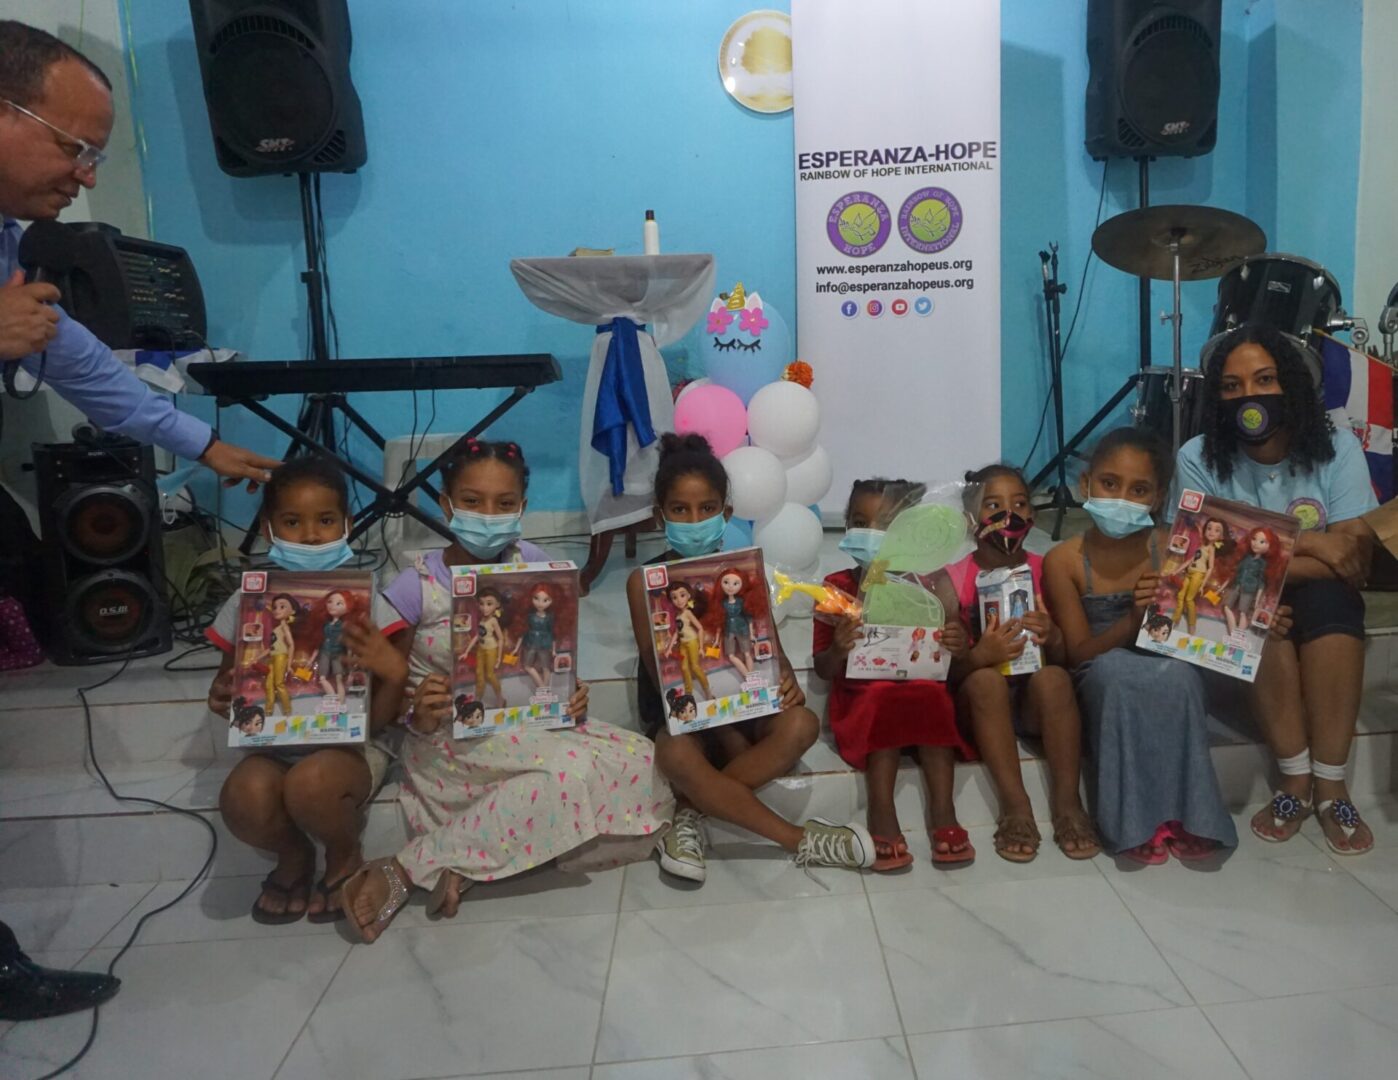 Our staff and six girls sitting near the drum set, each holding a toy